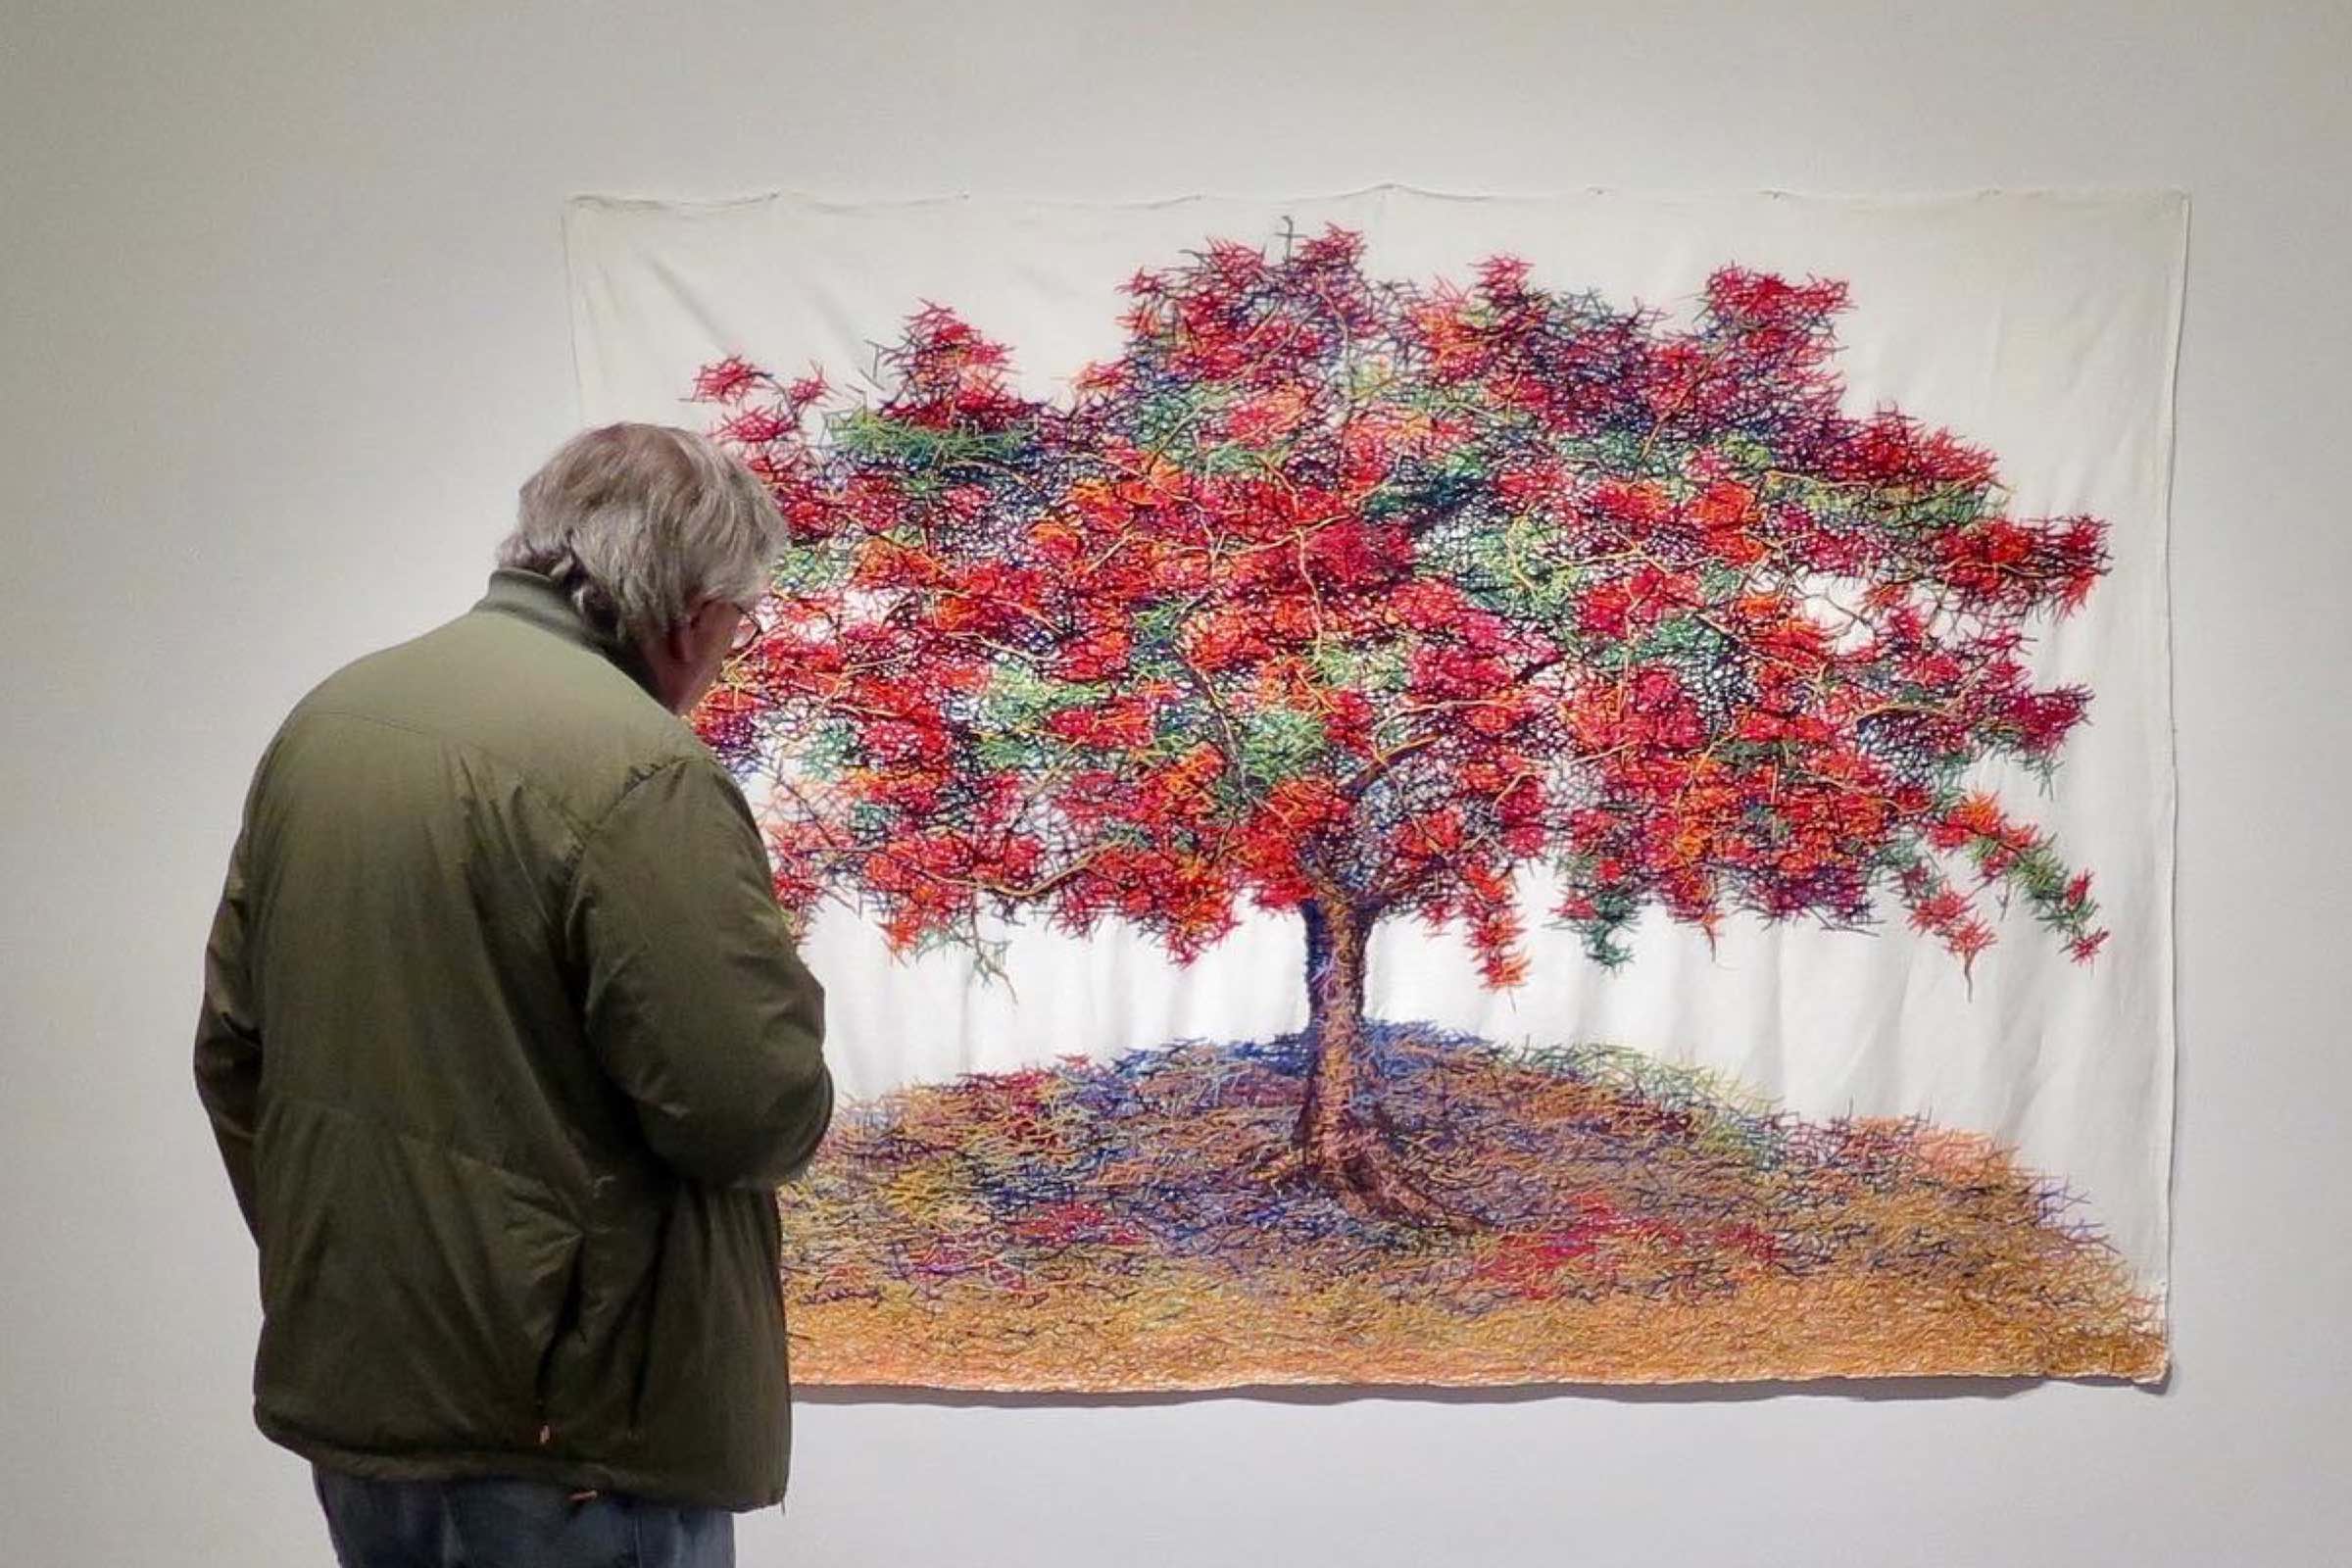 Man looking at a work of art on the wall of a tree